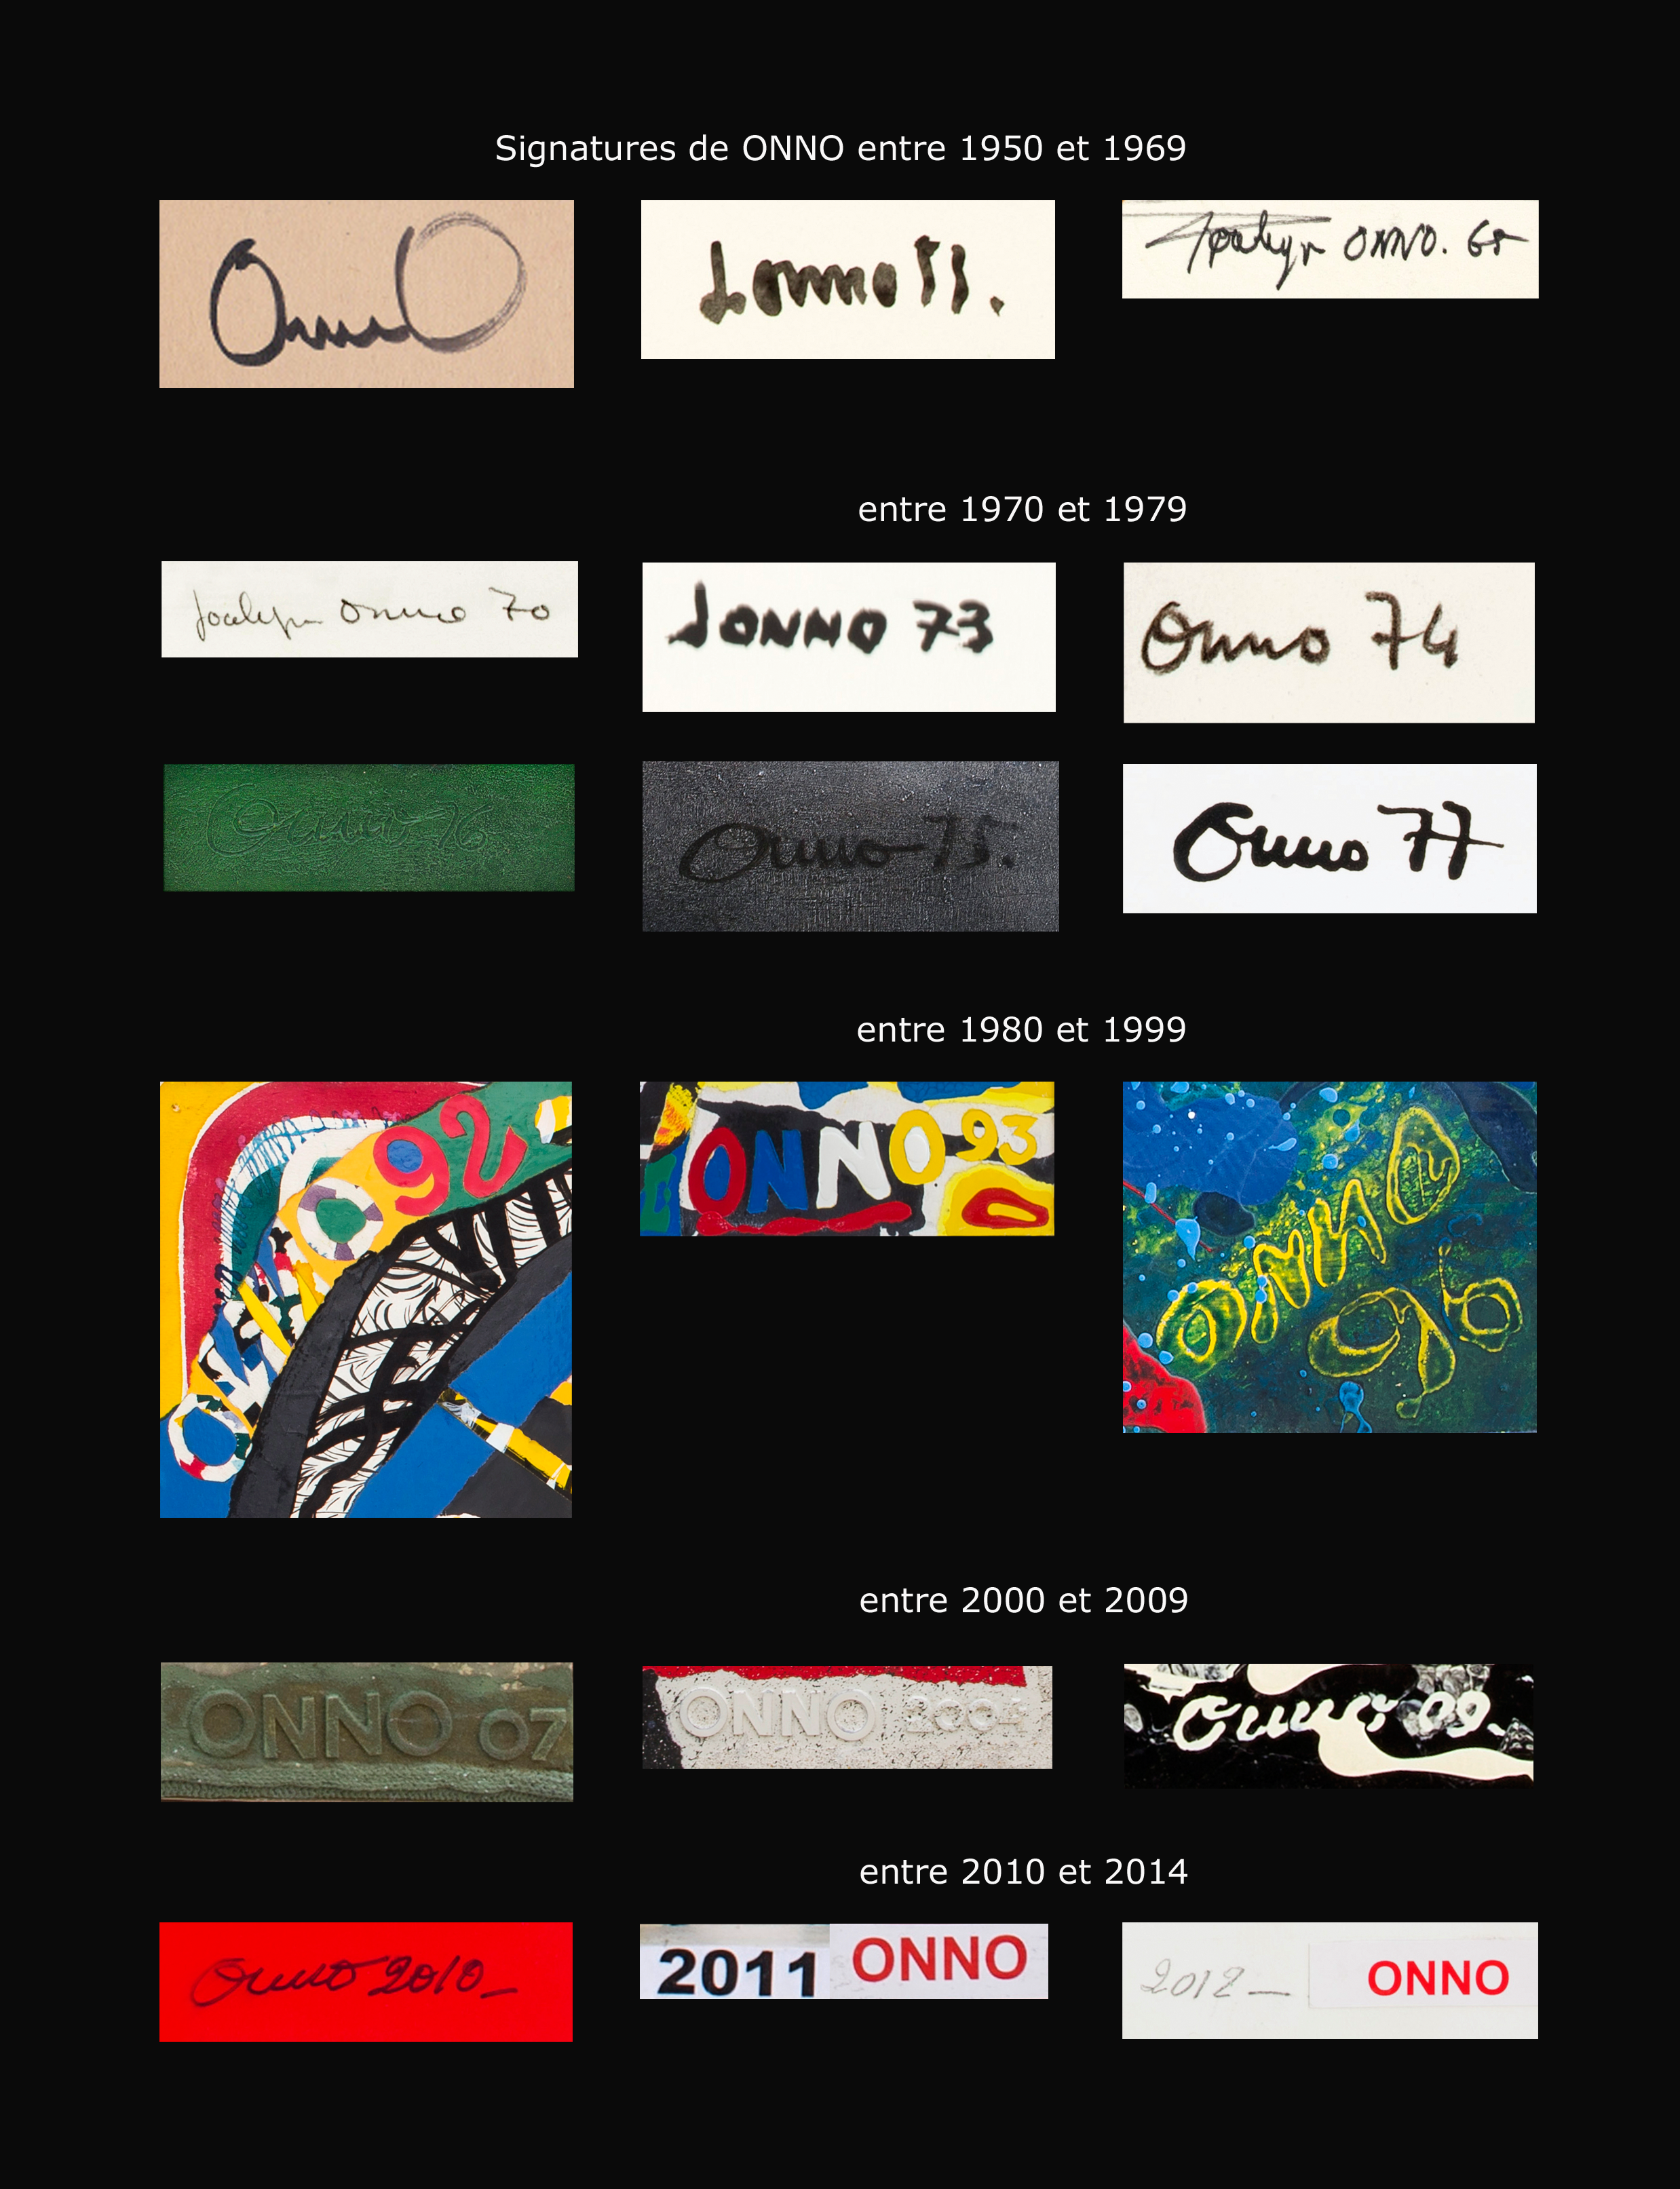 File:ONNO SIGNATURES.png - Wikimedia Commons